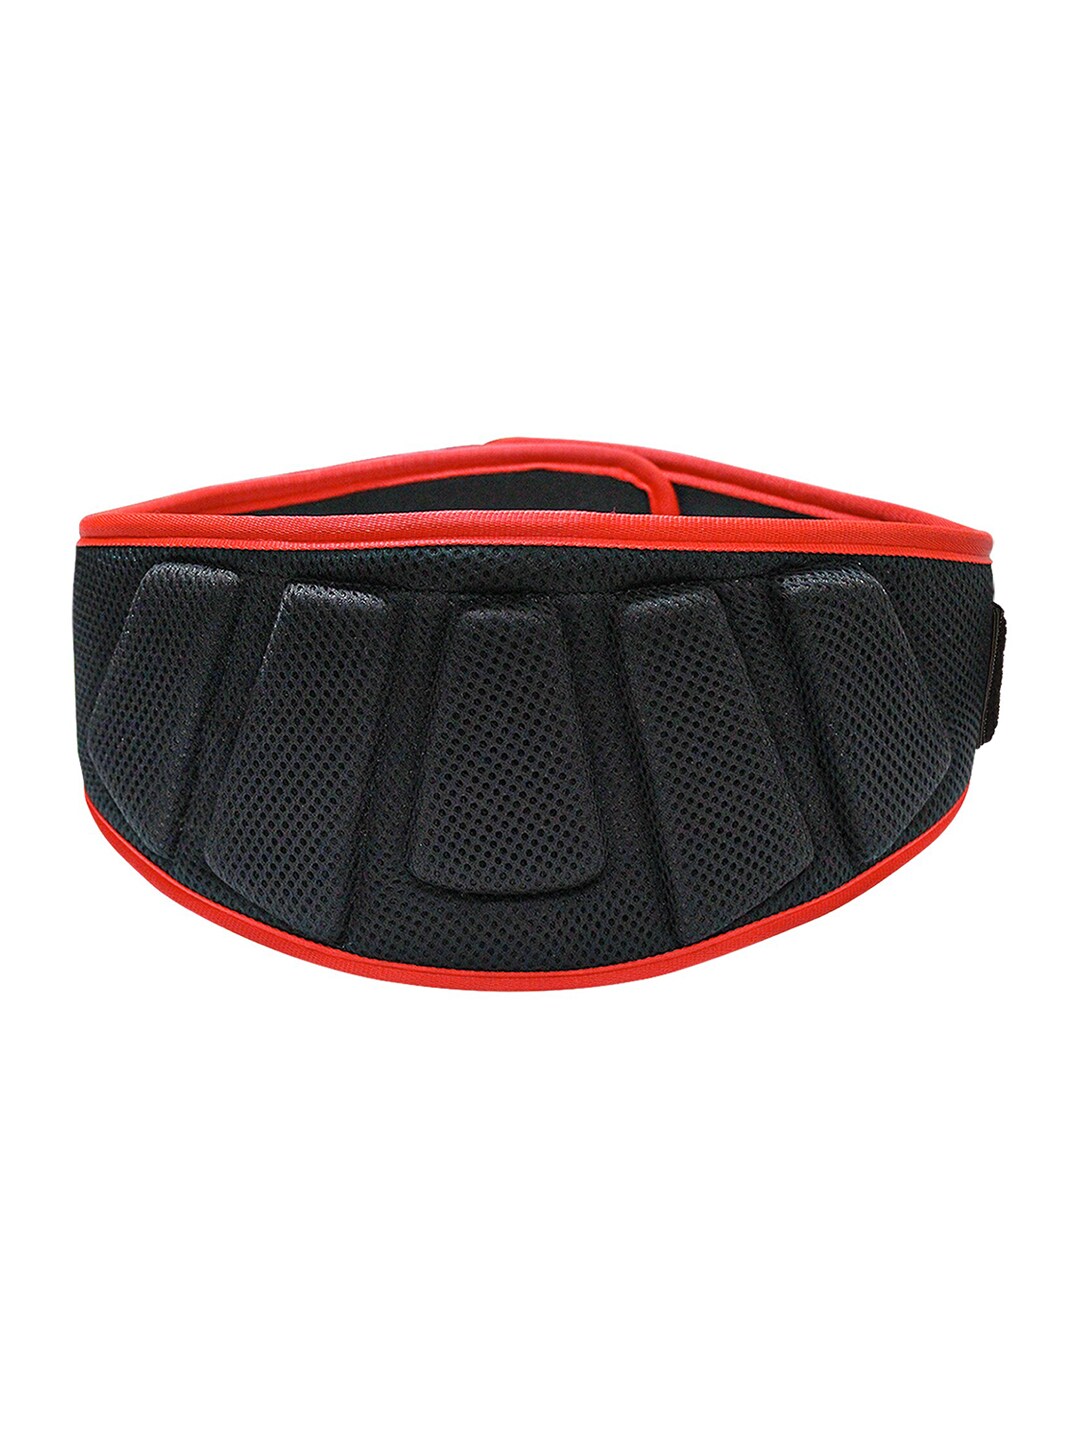 MUSCLEXP Black & Red Solid Padded Weightlifting Belt Price in India